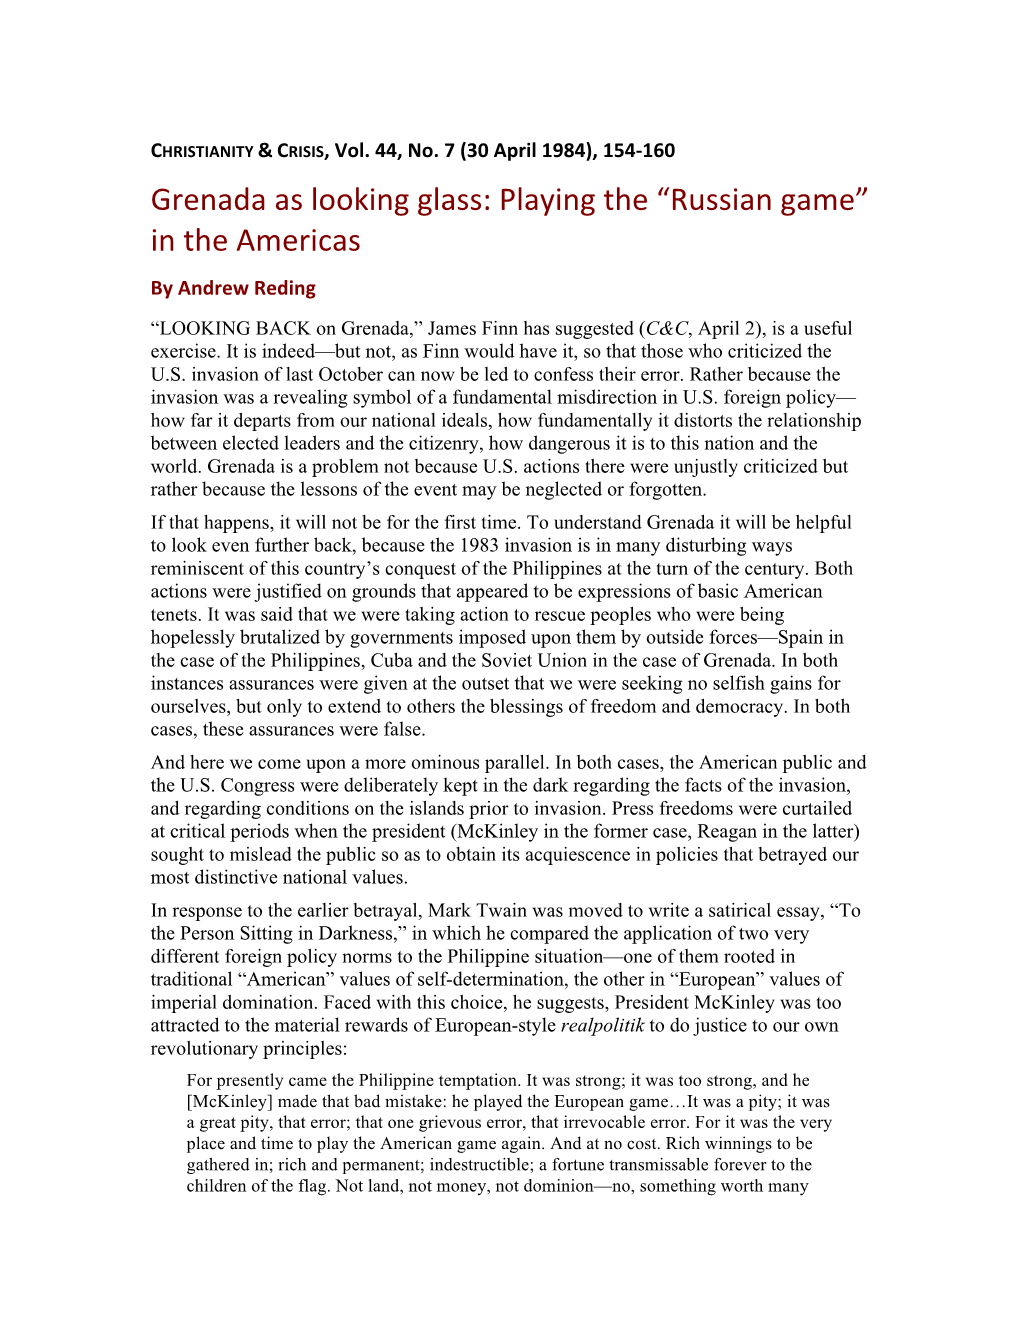 Grenada As Looking Glass: Playing the “Russian Game” in the Americas